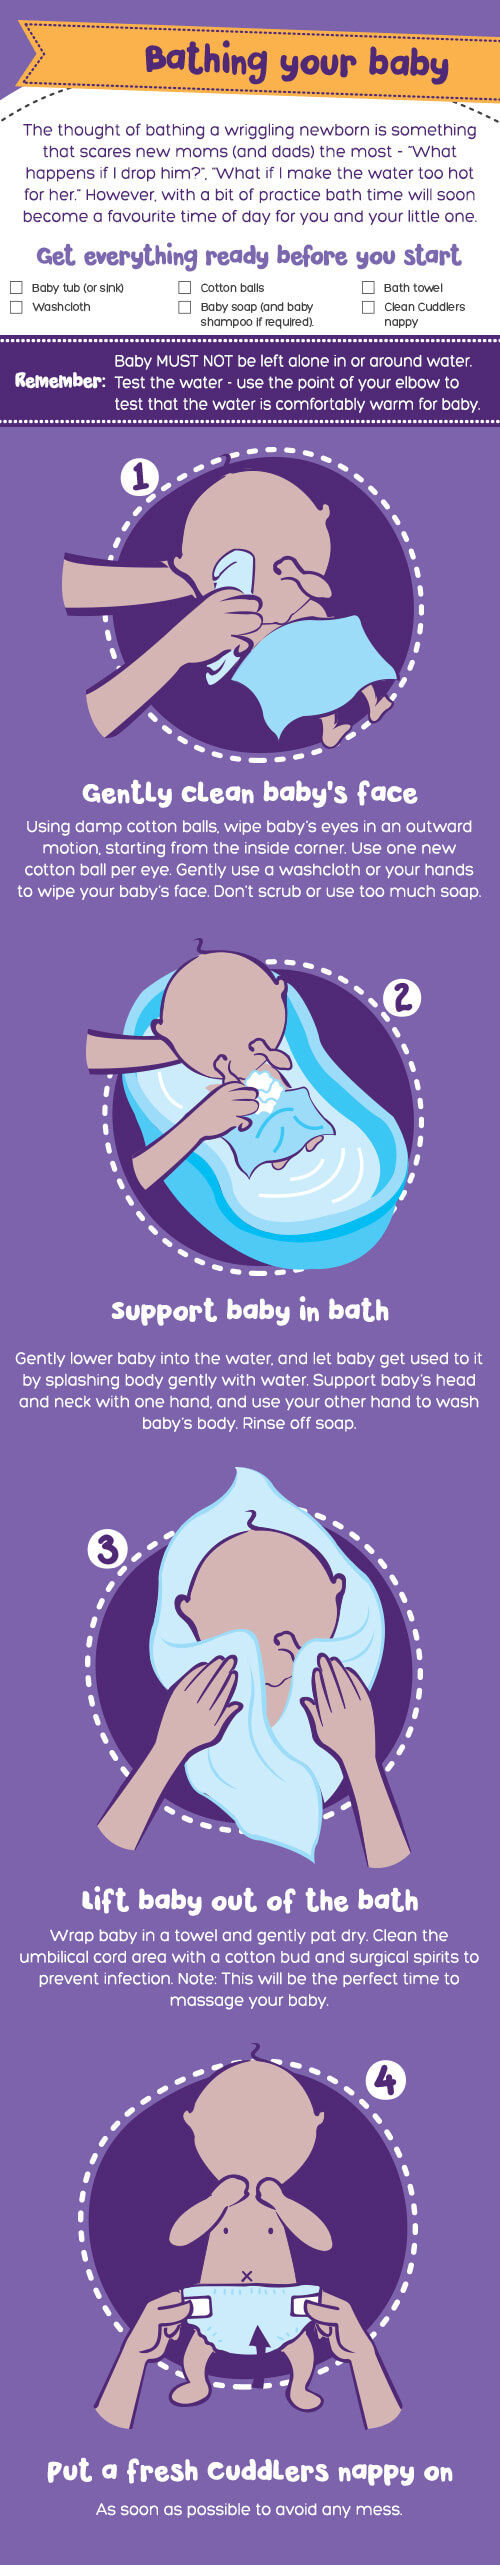 Bathing Your Baby Mobile